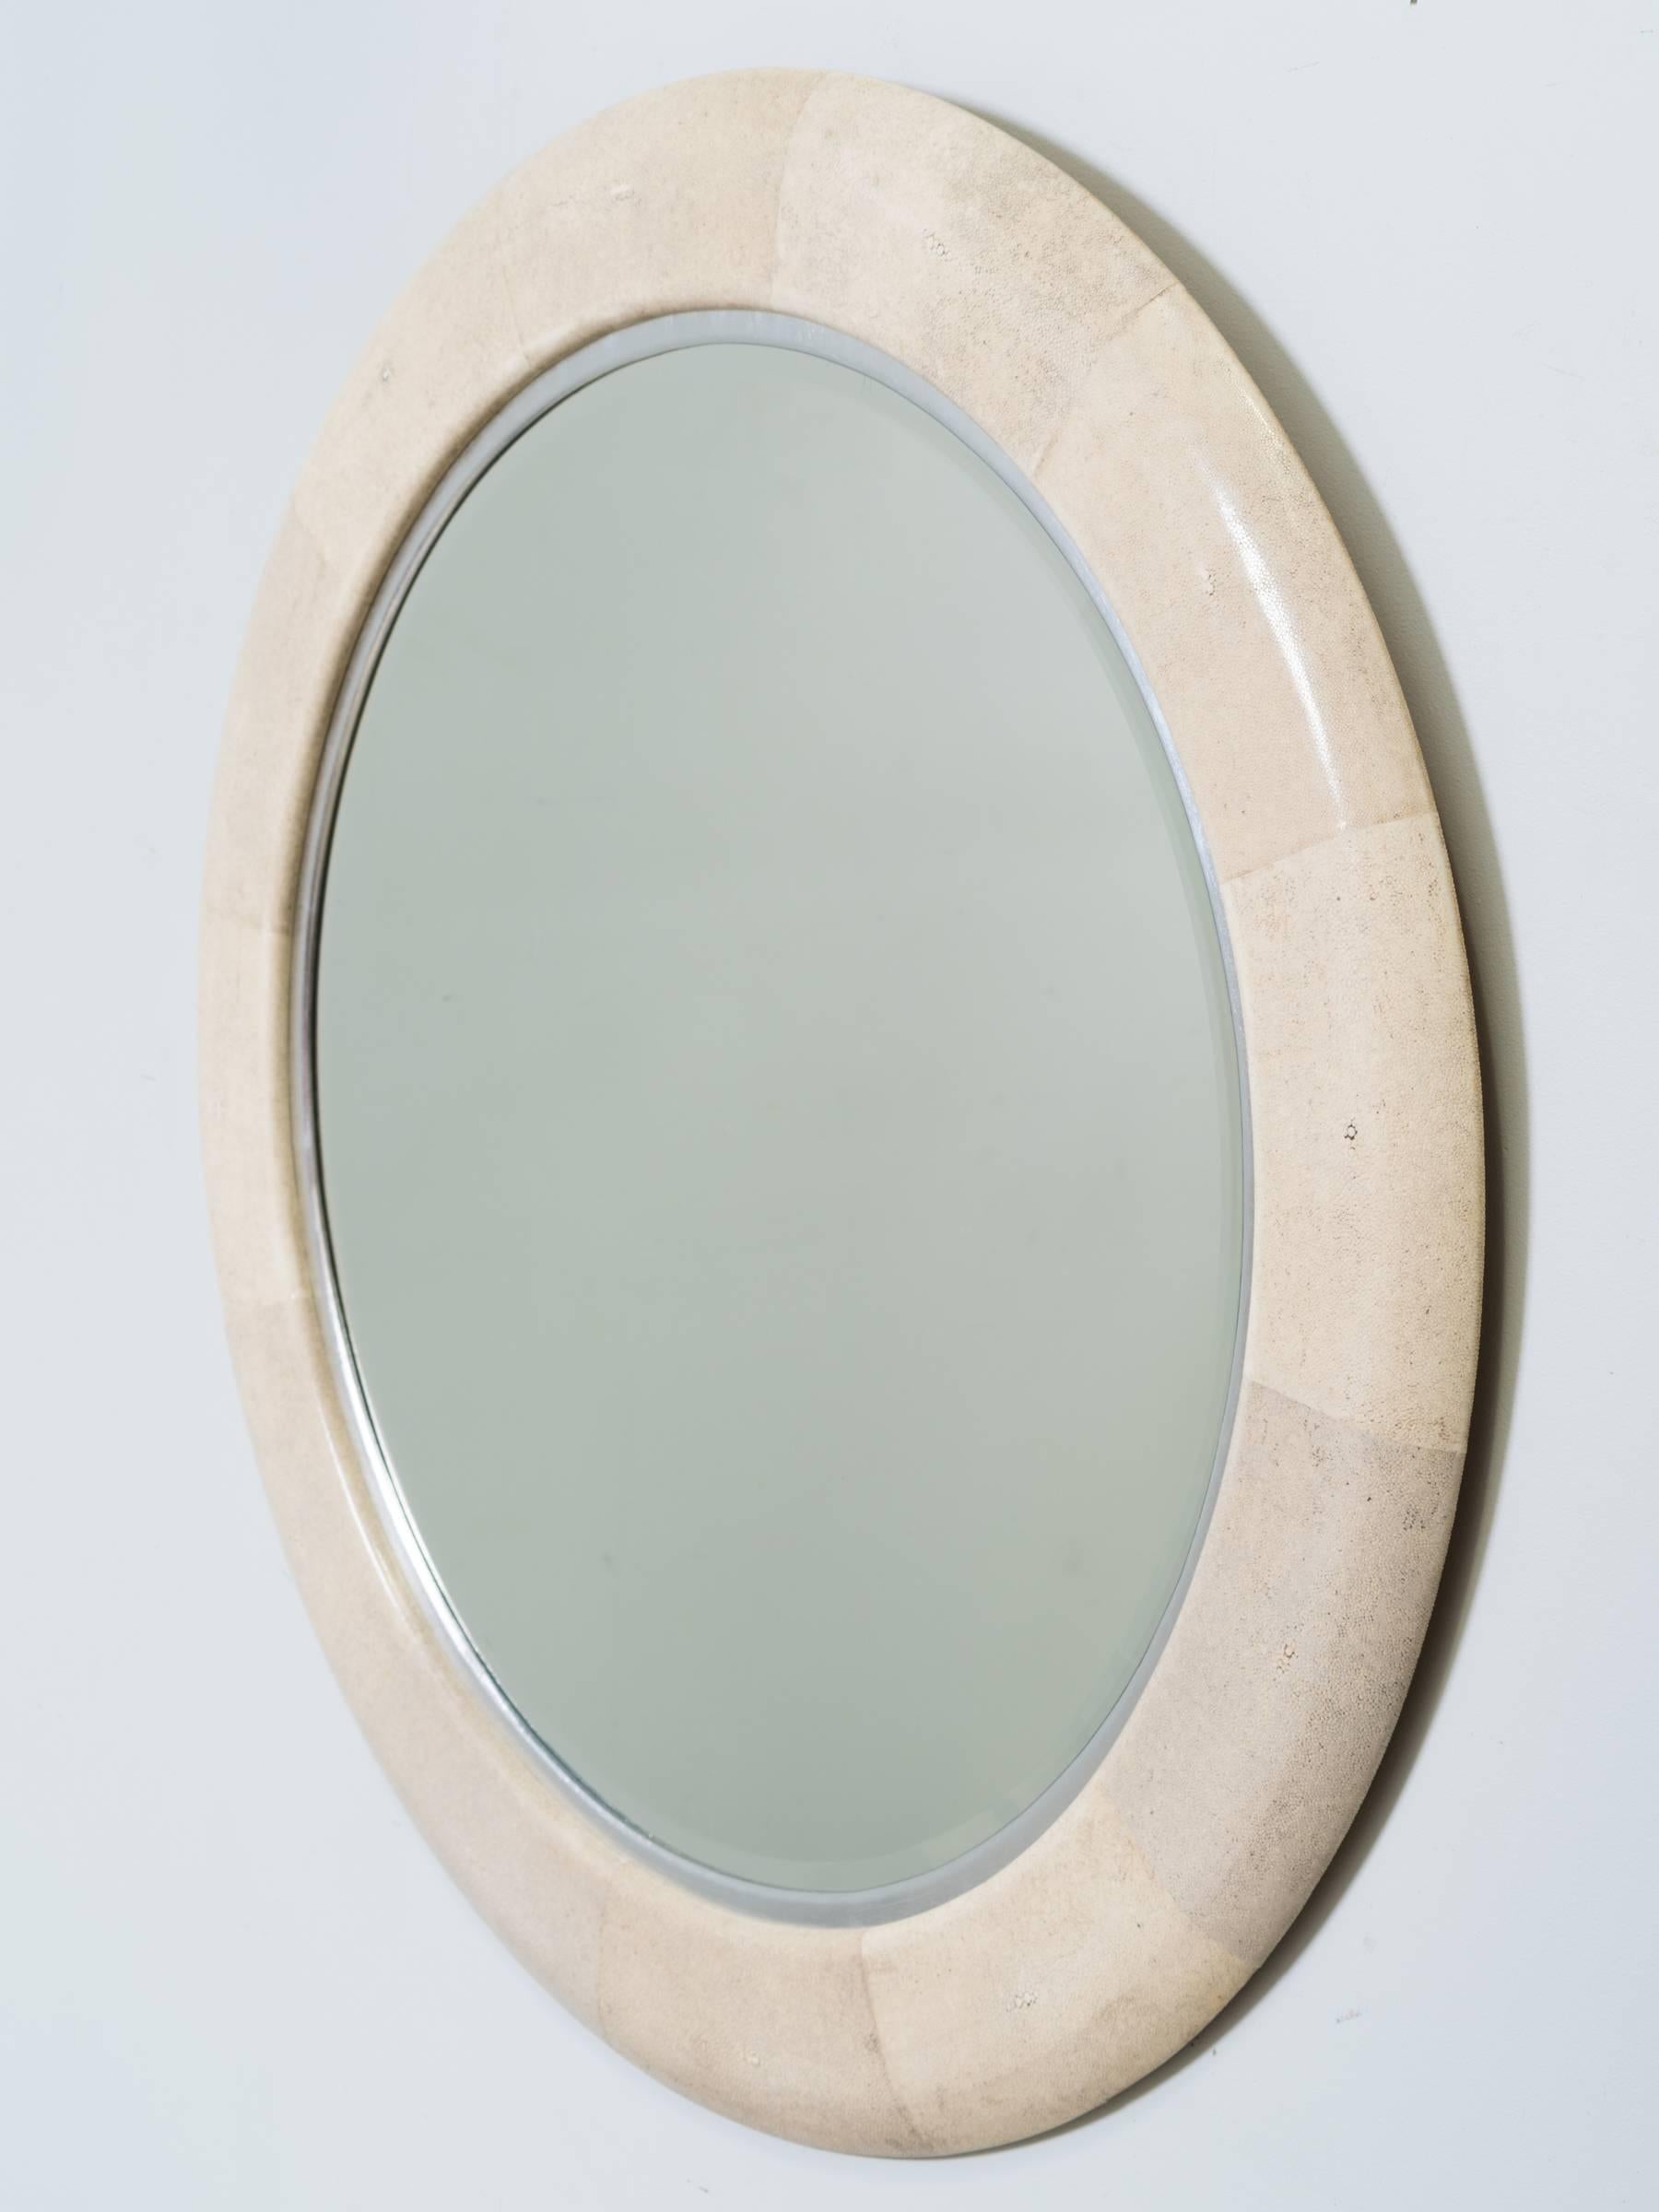 The Alice glass mirror is 12 sections of shagreen with a silver leaf rim, designed by Bill Sofield for Baker.